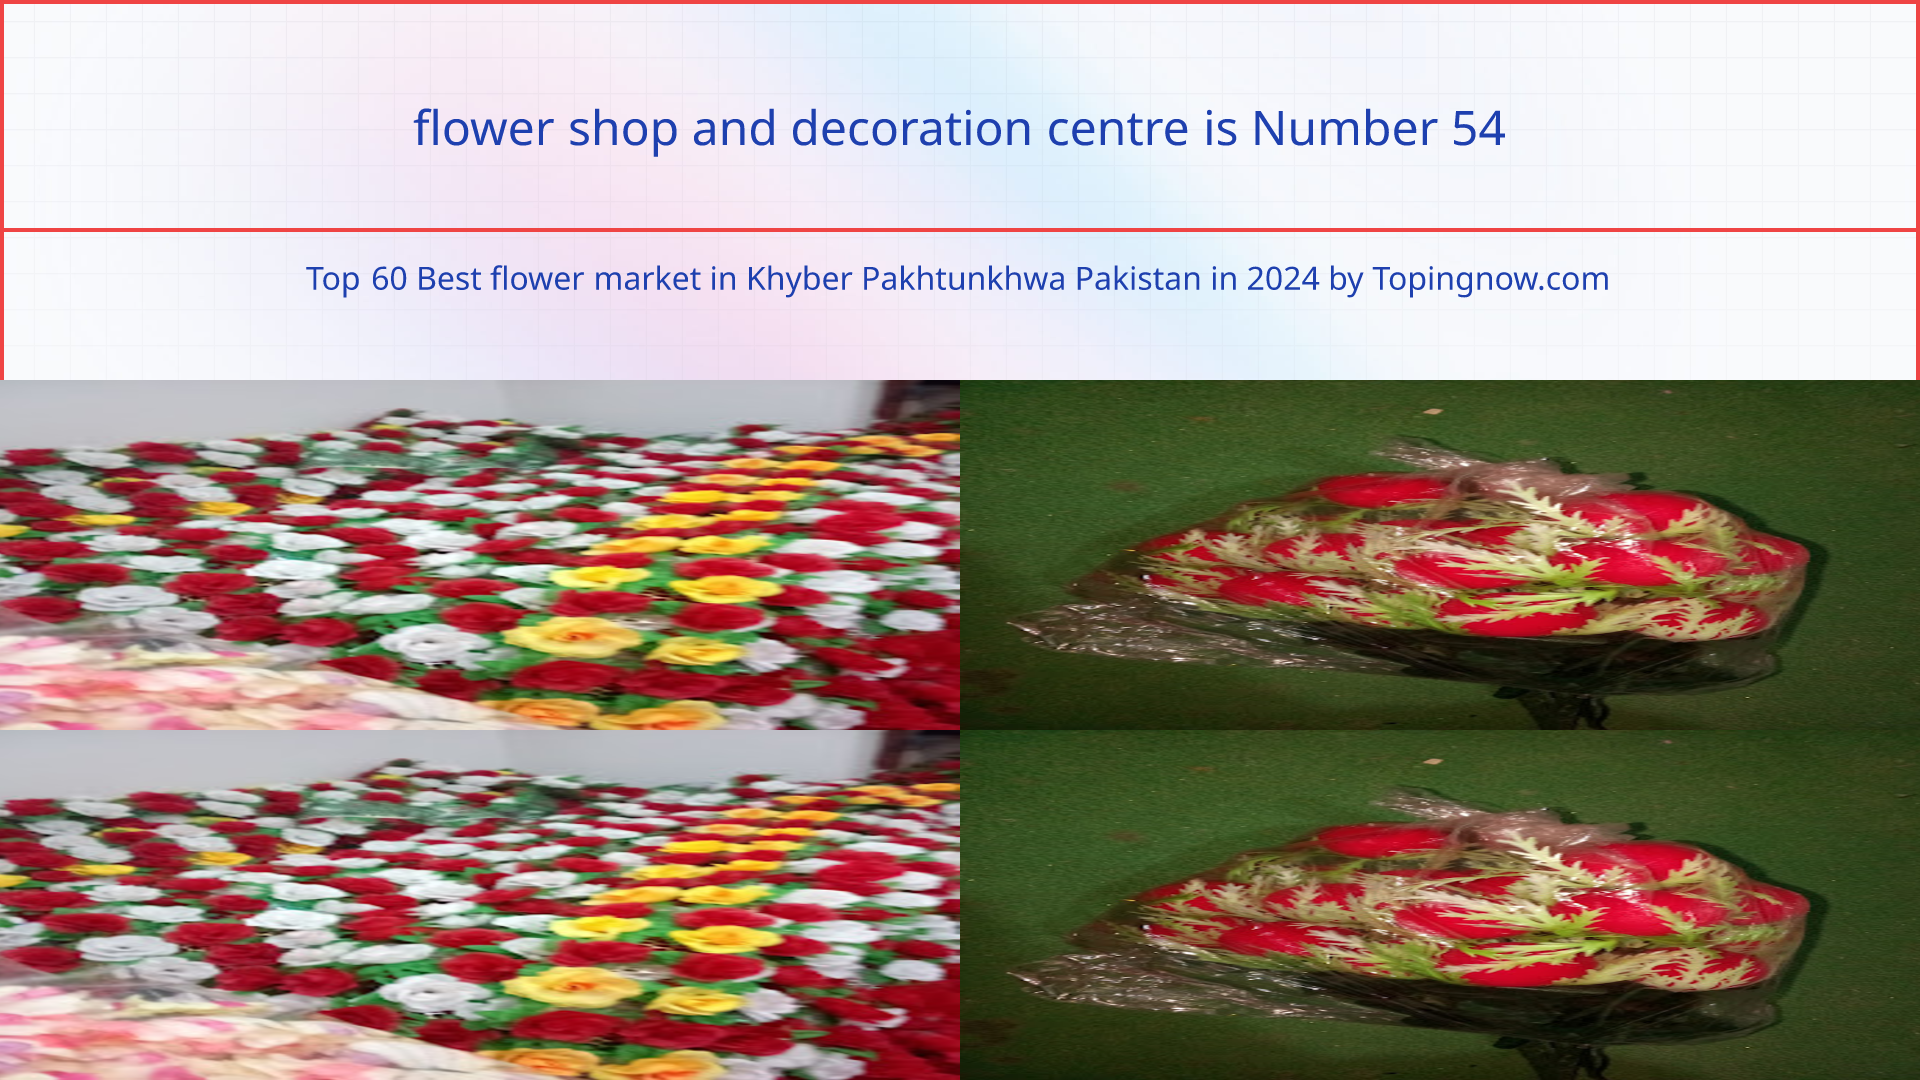 flower shop and decoration centre: Top 60 Best flower market in Khyber Pakhtunkhwa Pakistan in 2024